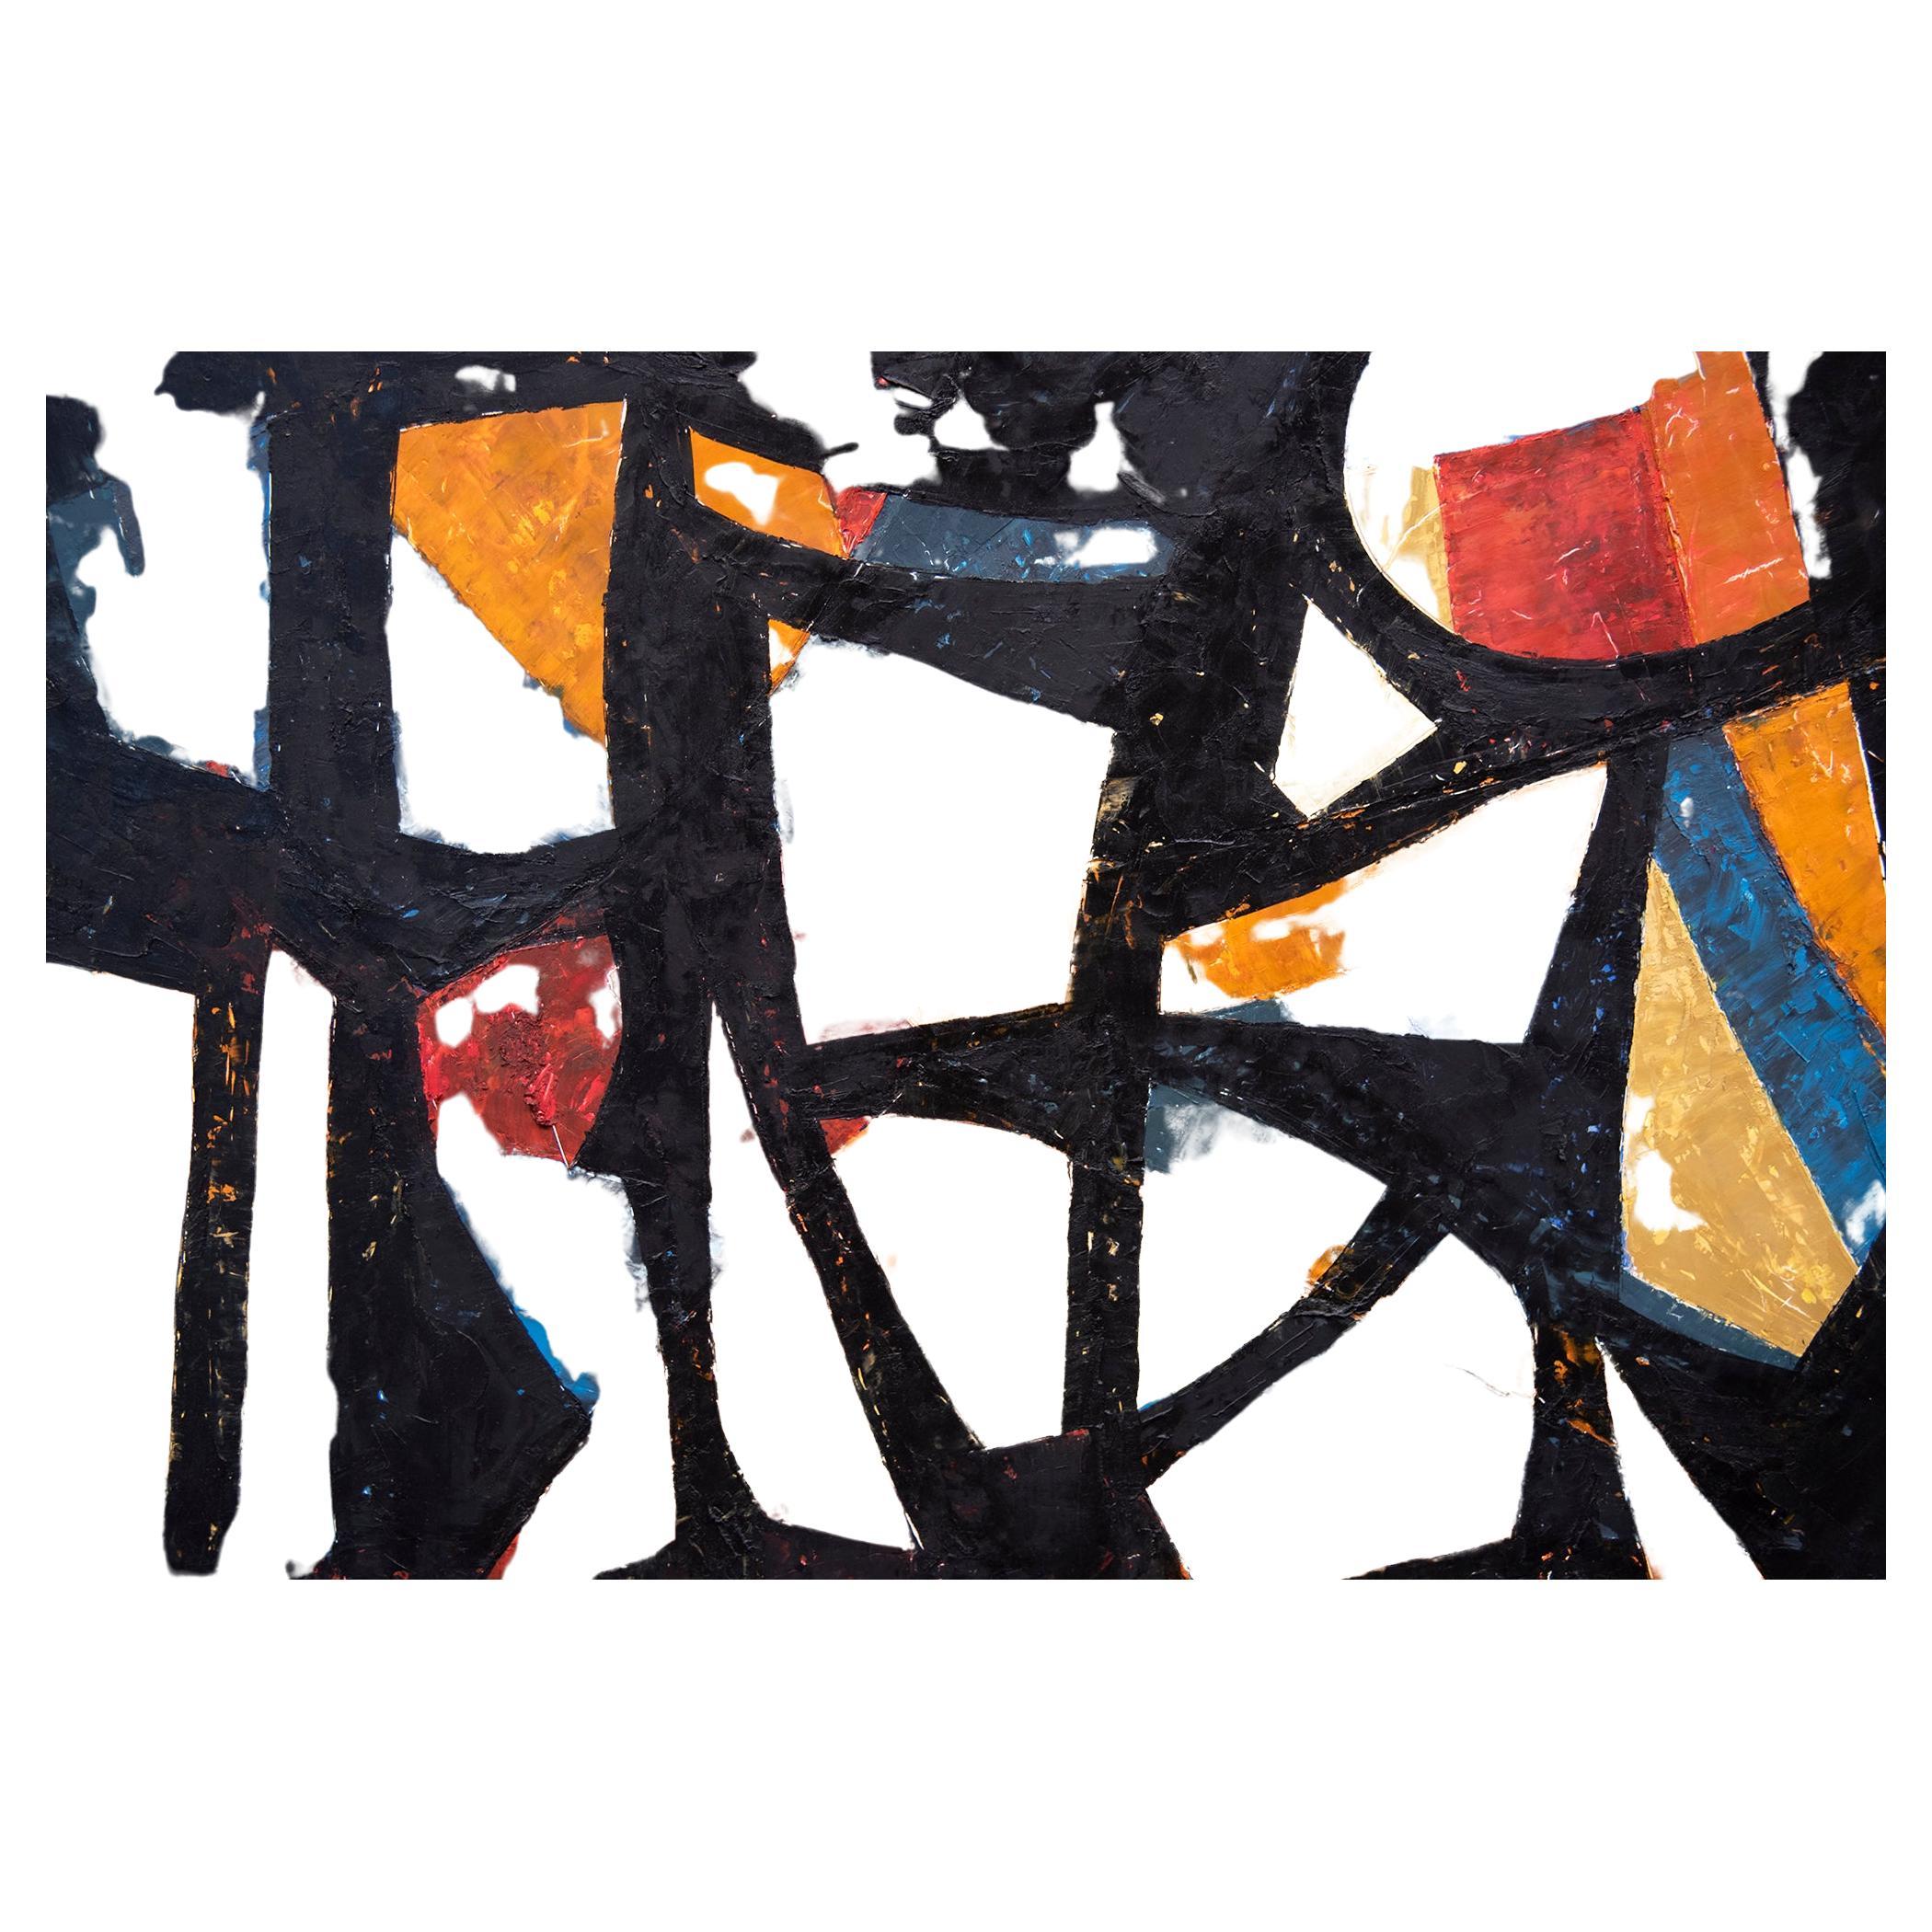 Abstract Painting by Timothy Norr entitled Tracery, 2007. Oil on canvas, signed by the artist.